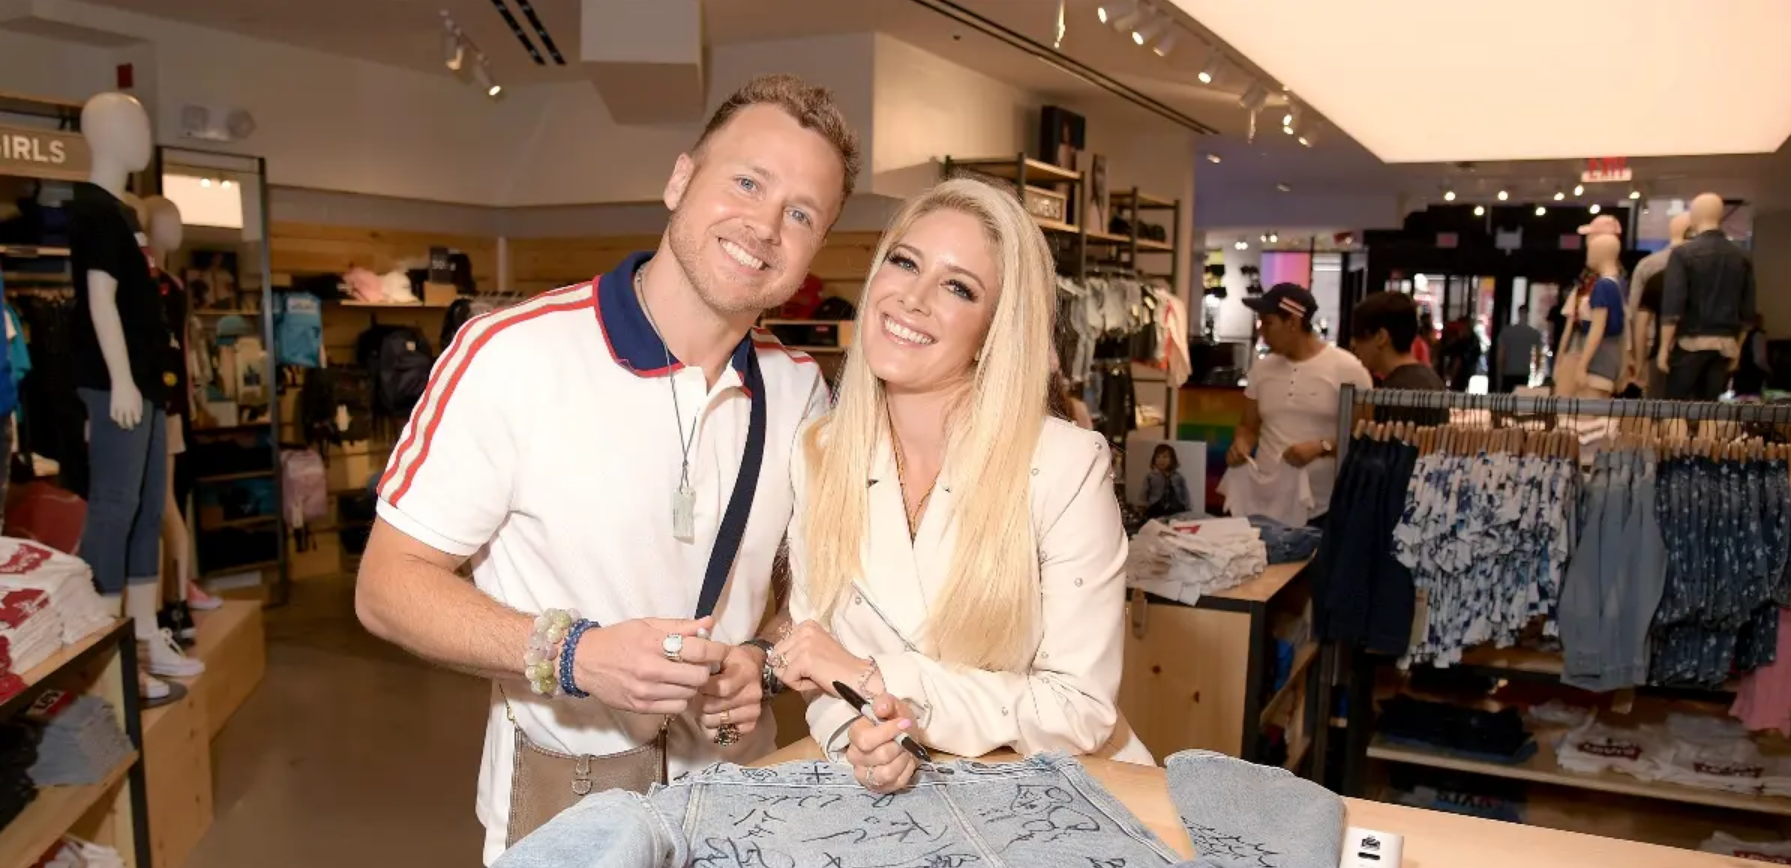 Spencer Pratt and Heidi Montag visit "Extra" at The Levi's Store Times Square.